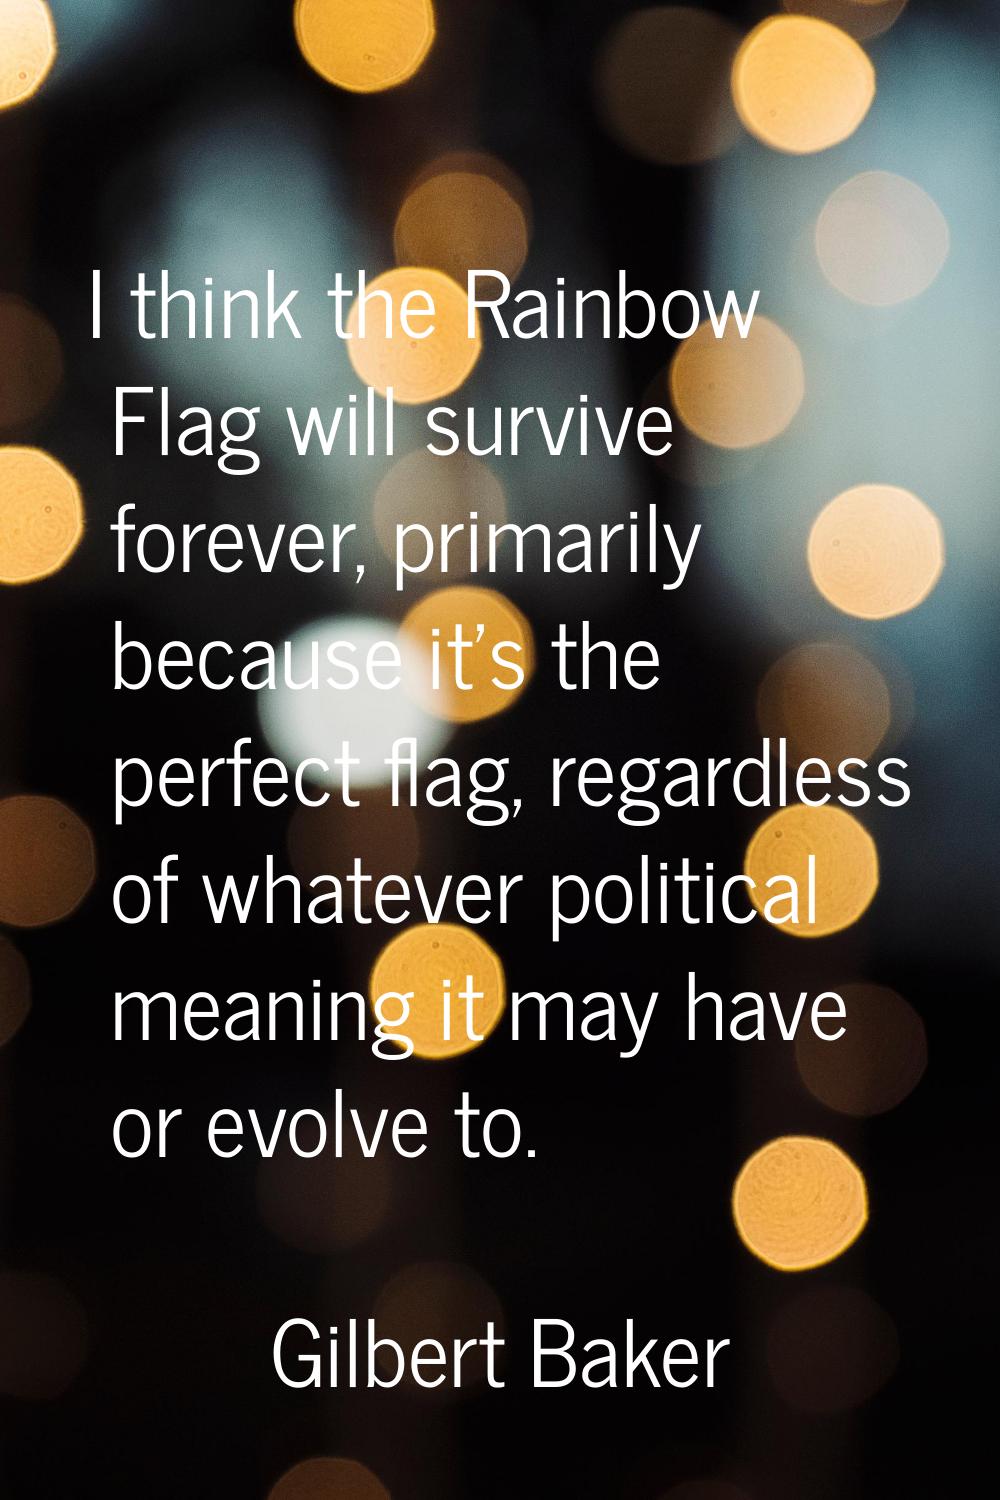 I think the Rainbow Flag will survive forever, primarily because it's the perfect flag, regardless 